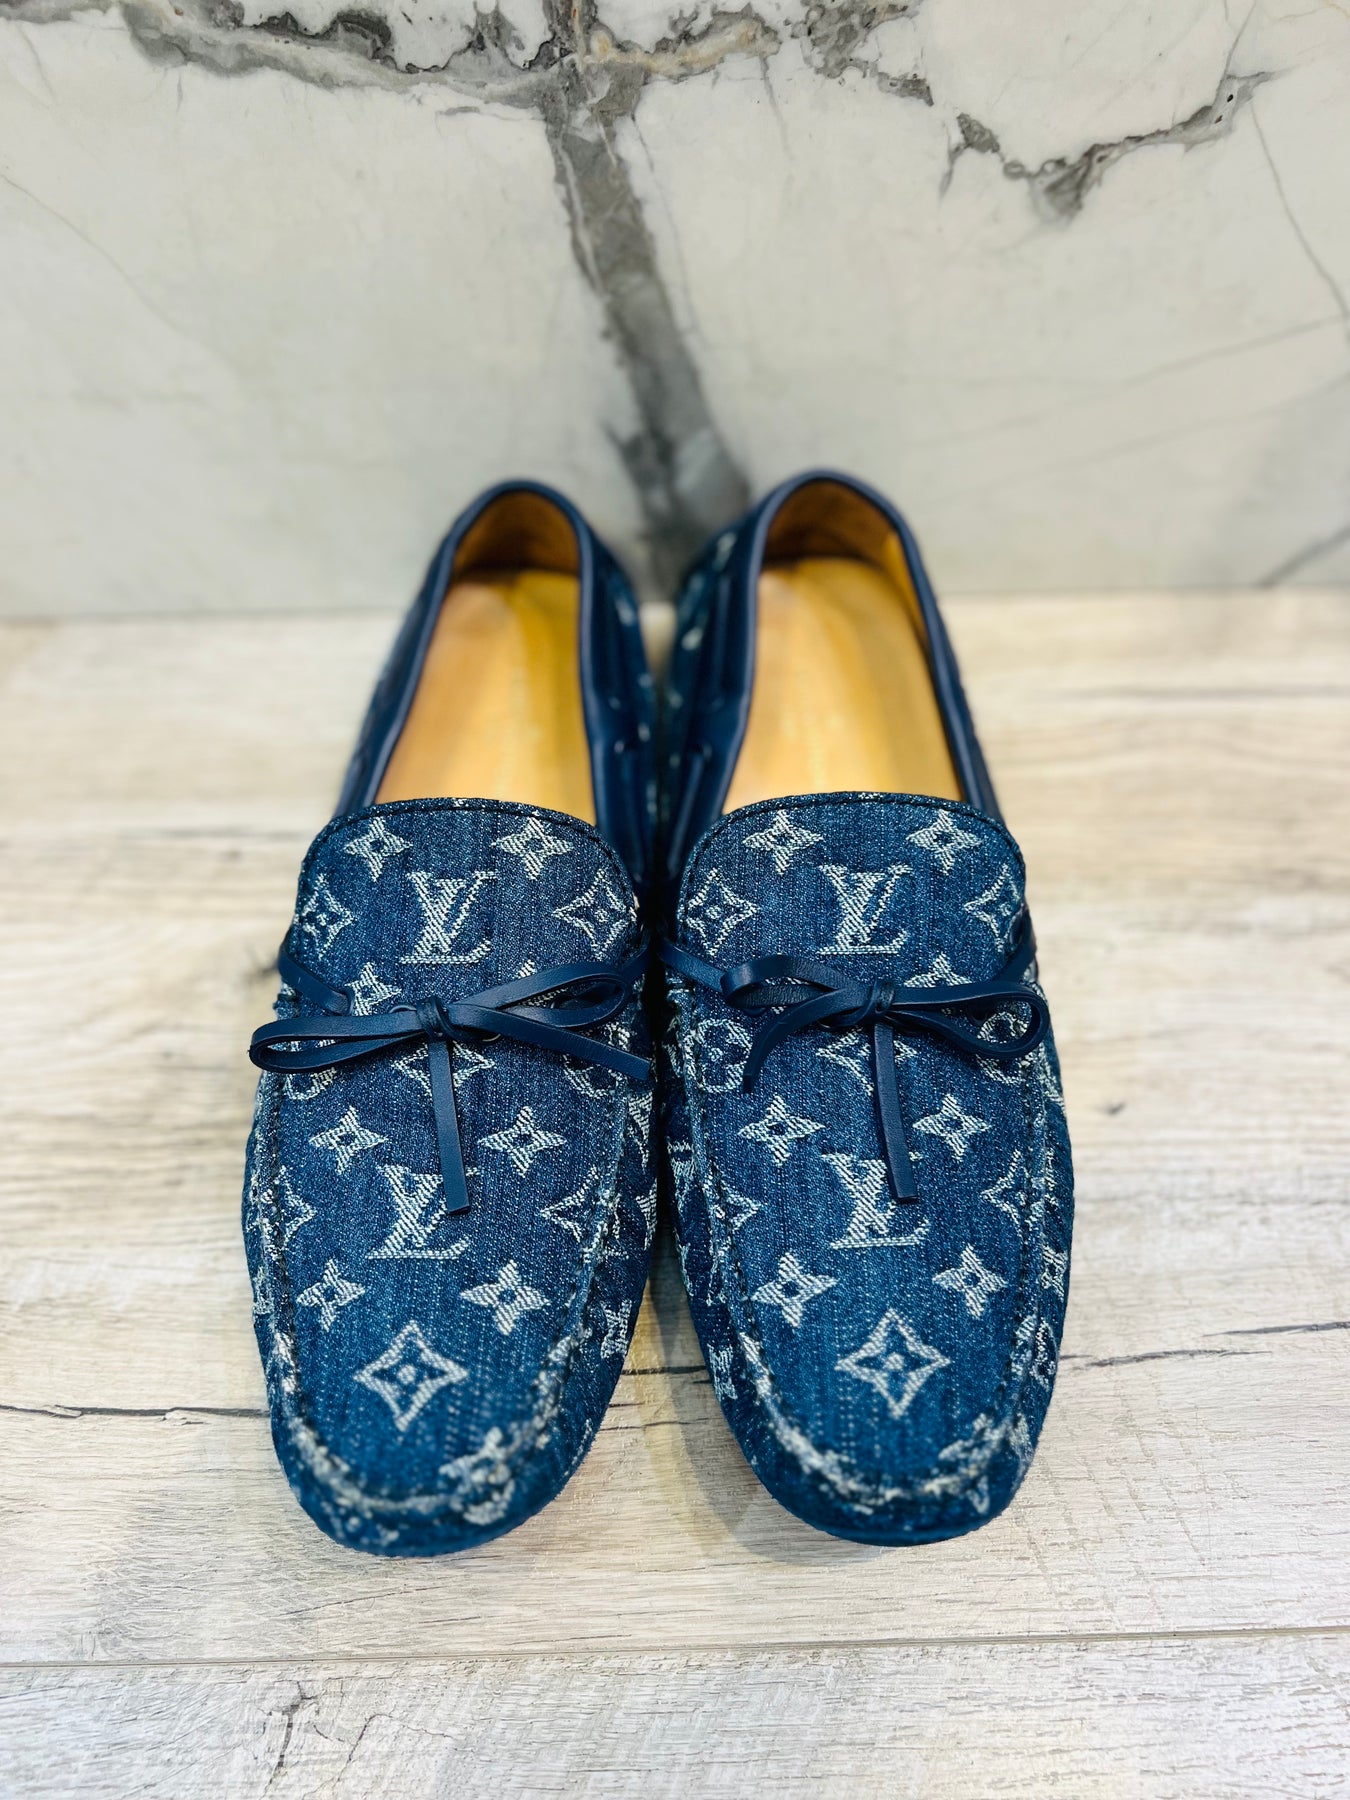 Louis Vuitton Denim Loafers with Tassel — UFO No More